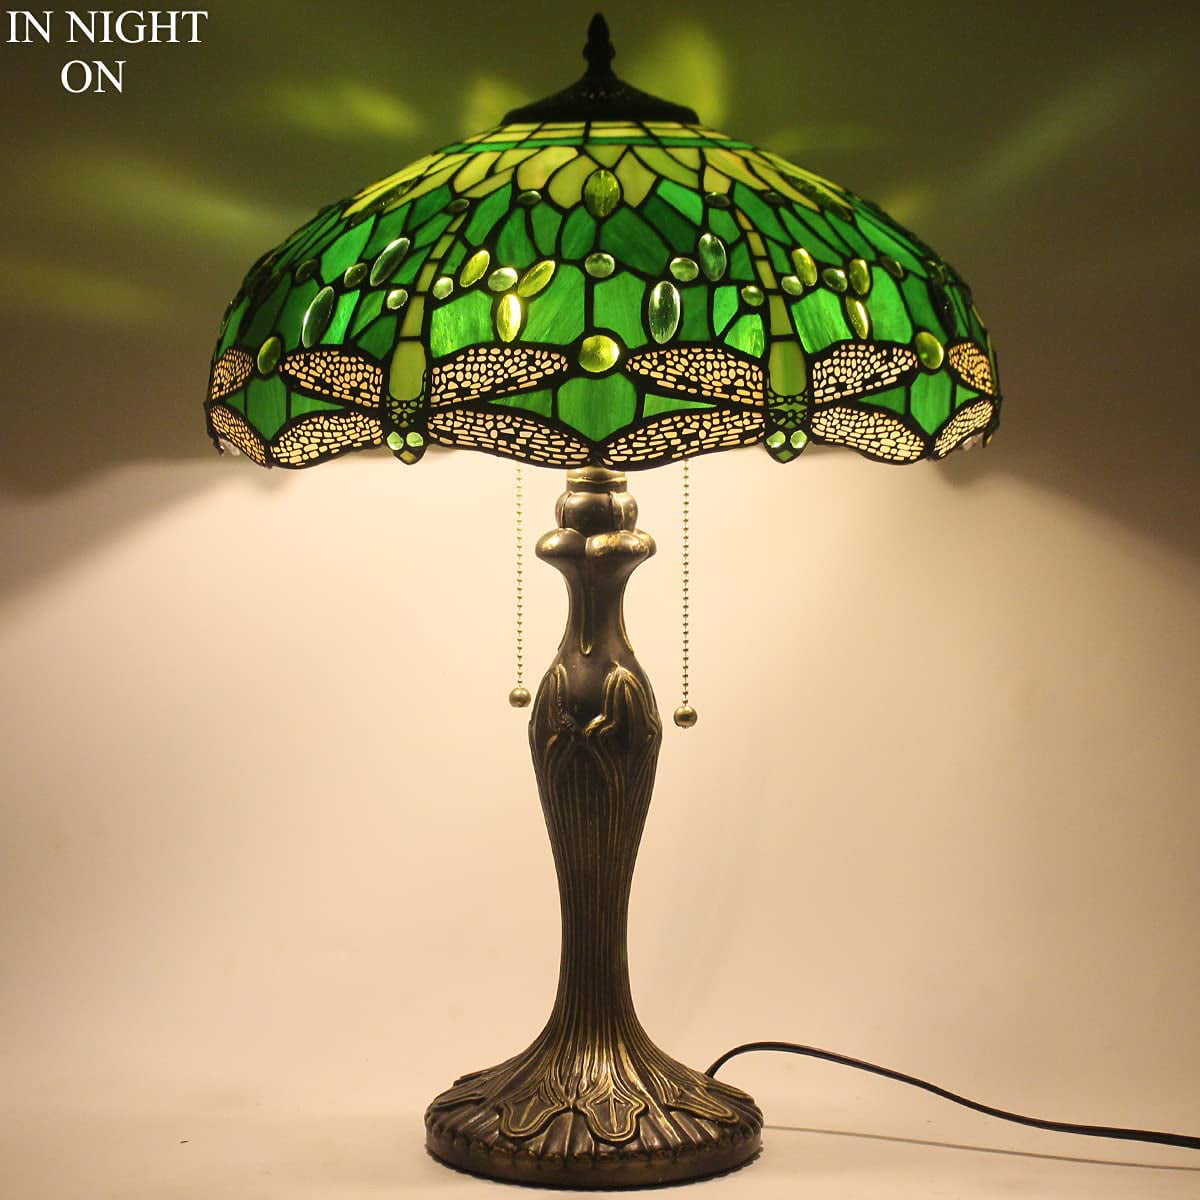  Style Table Lamp Green Stained Glass Dragonfly Bedside Lamp 16X16X24 Inch Desk Reading Light Metal Base Decor Bedroom Living Room Home Office S459 Series